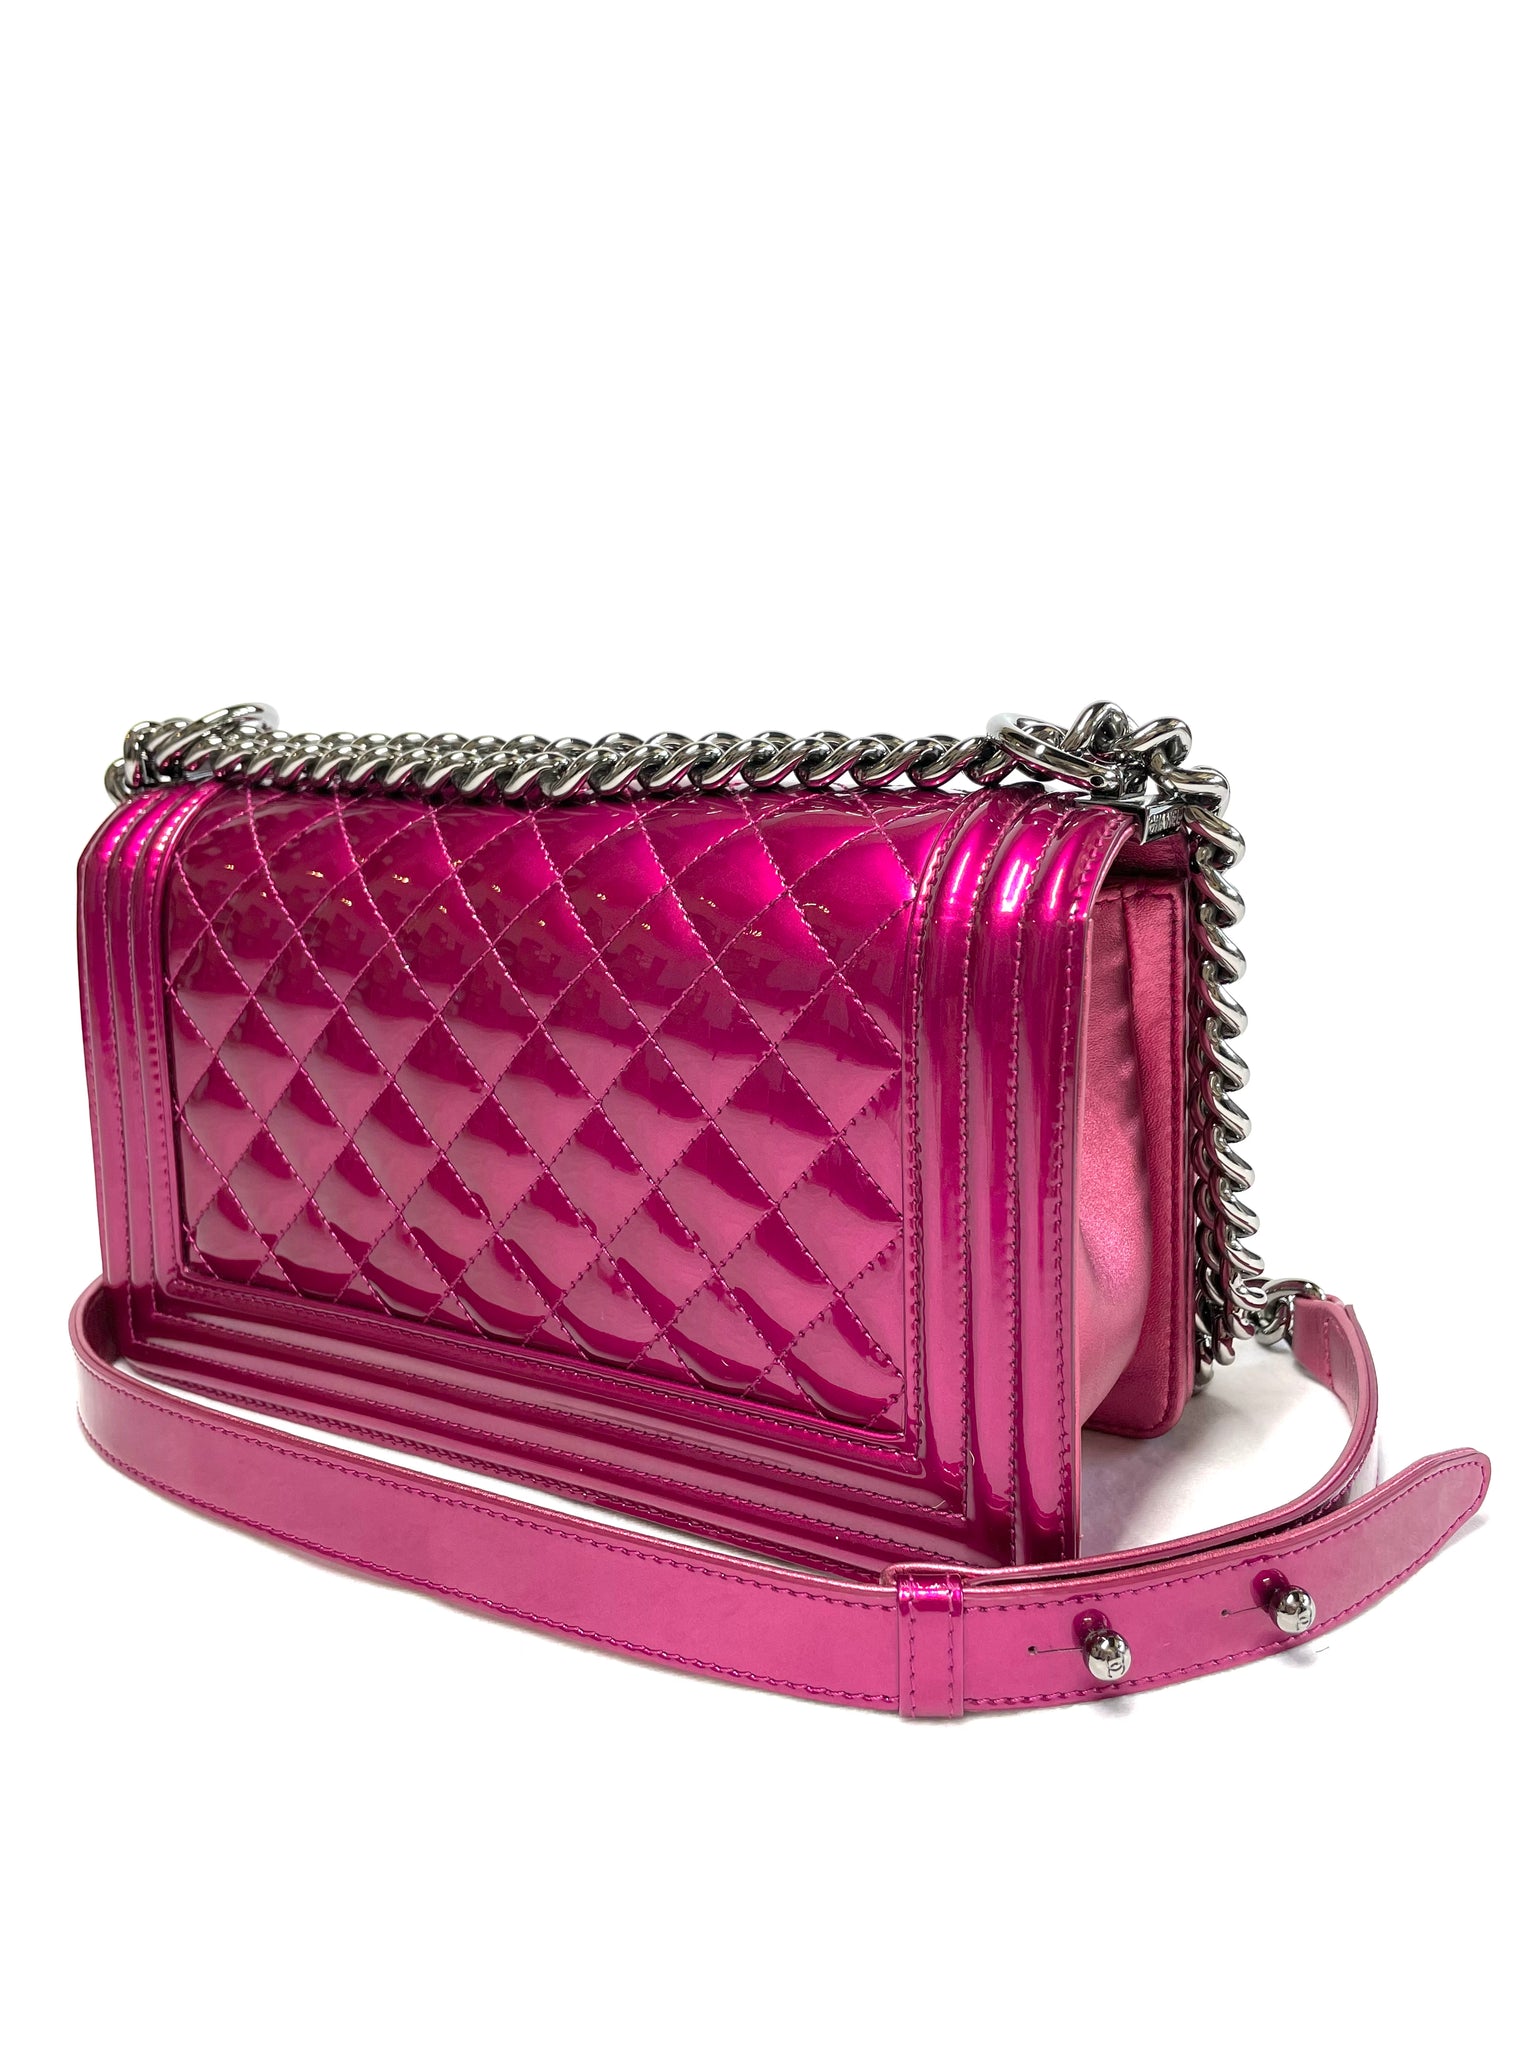 Photo of Chanel Medium Fuchsia Patent Boy Bag *limited edition* available at UniKoncept in Waterloo